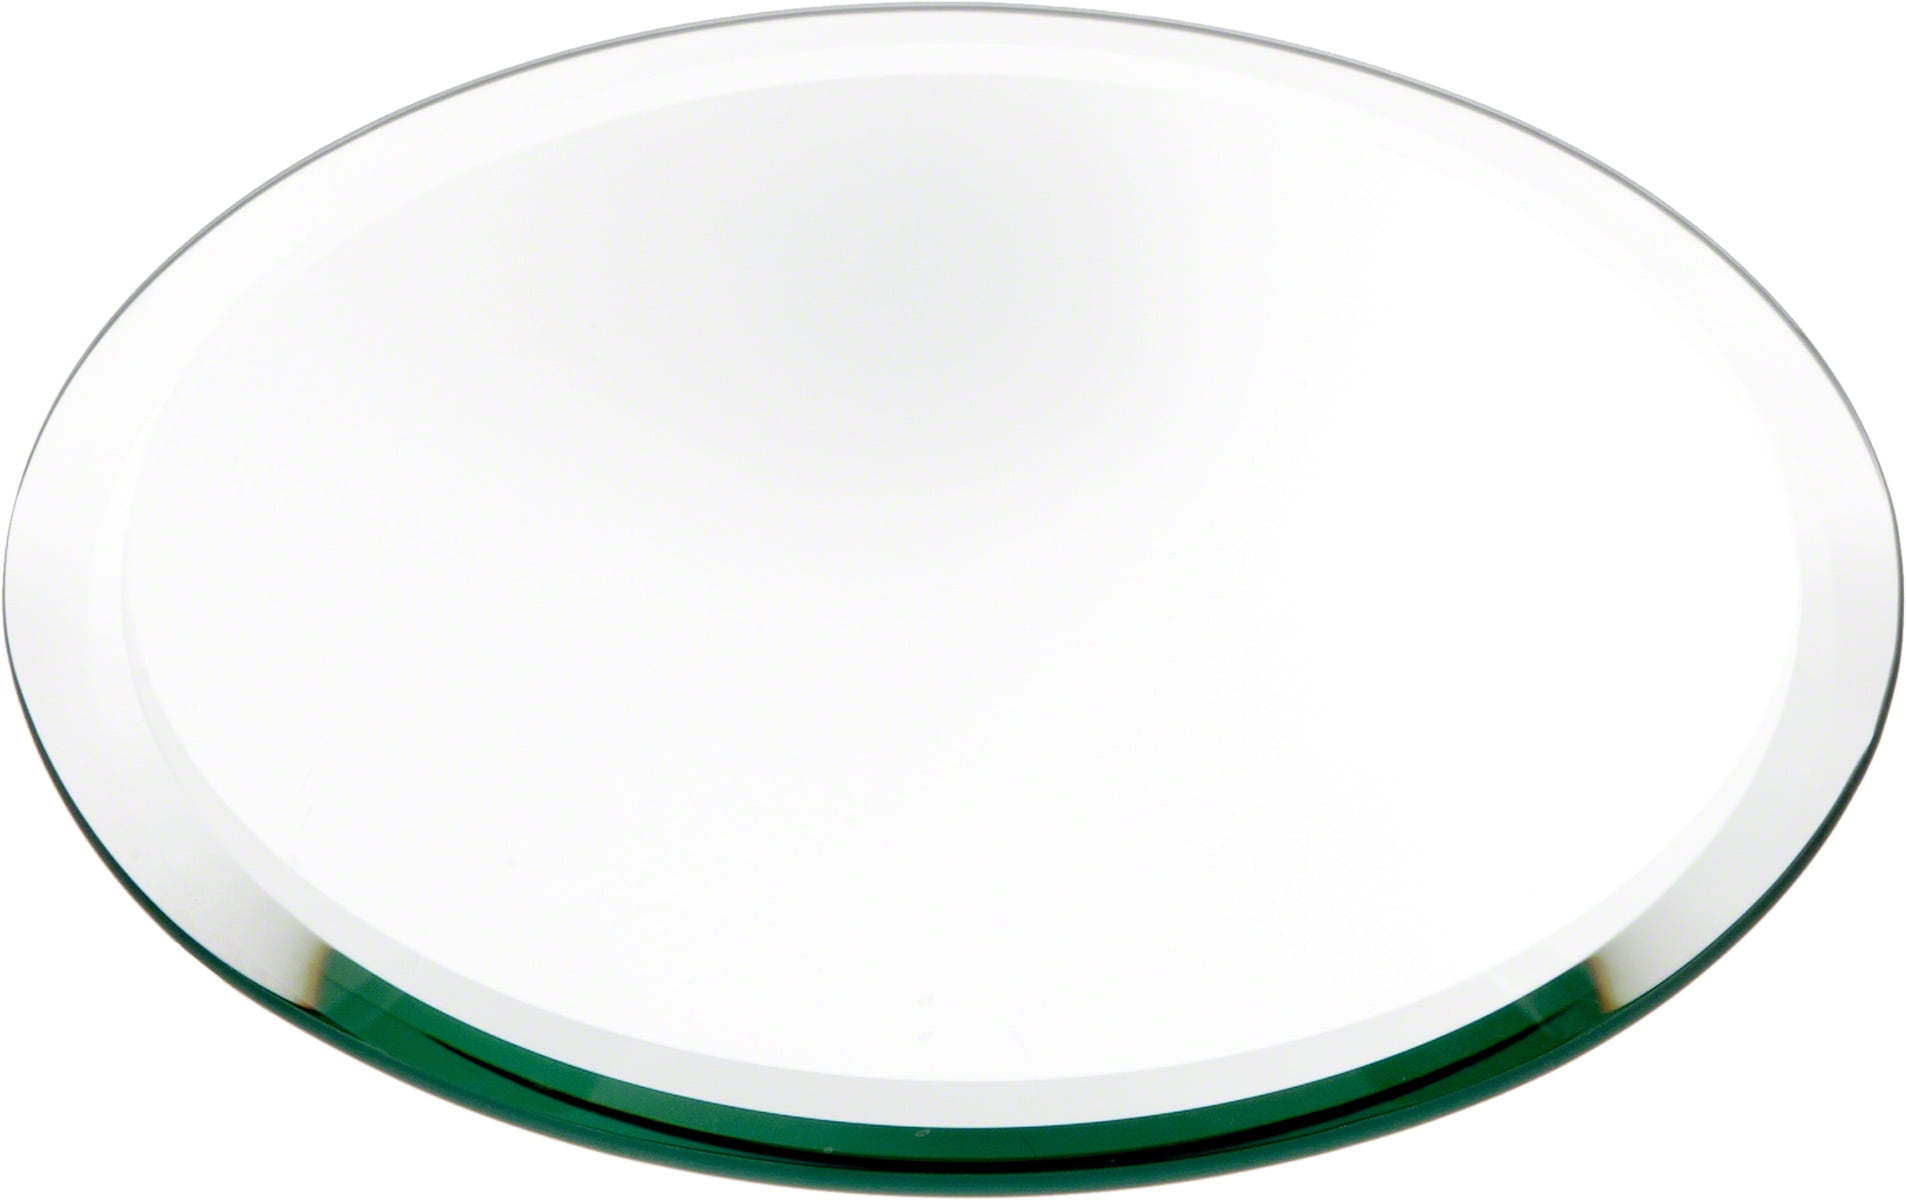 Plymor Round 5mm Beveled Etched Glass Mirror 6 inch x 6 inch 